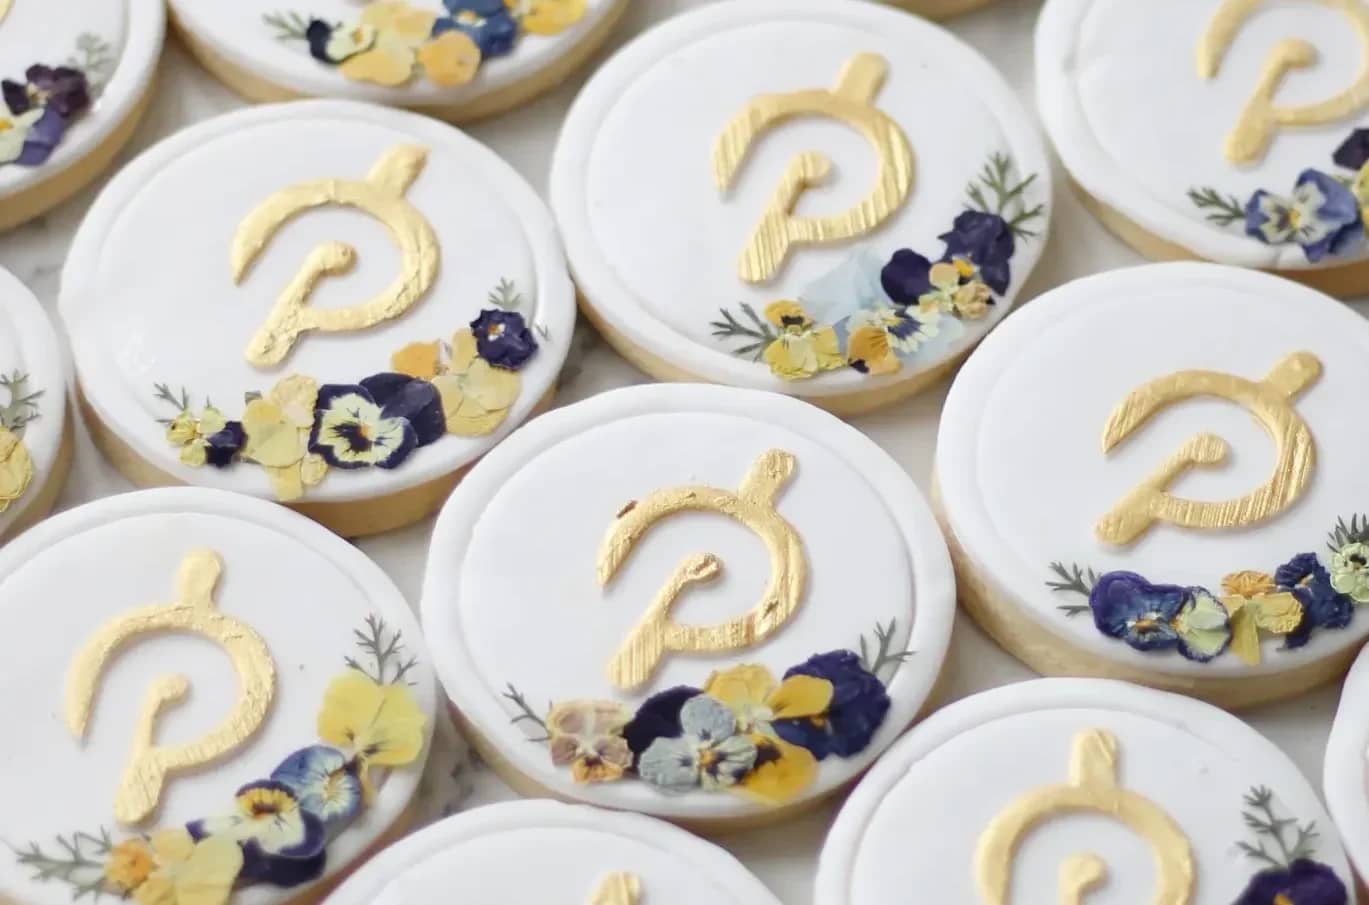 White fondant cookies with Peloton logo and flowers